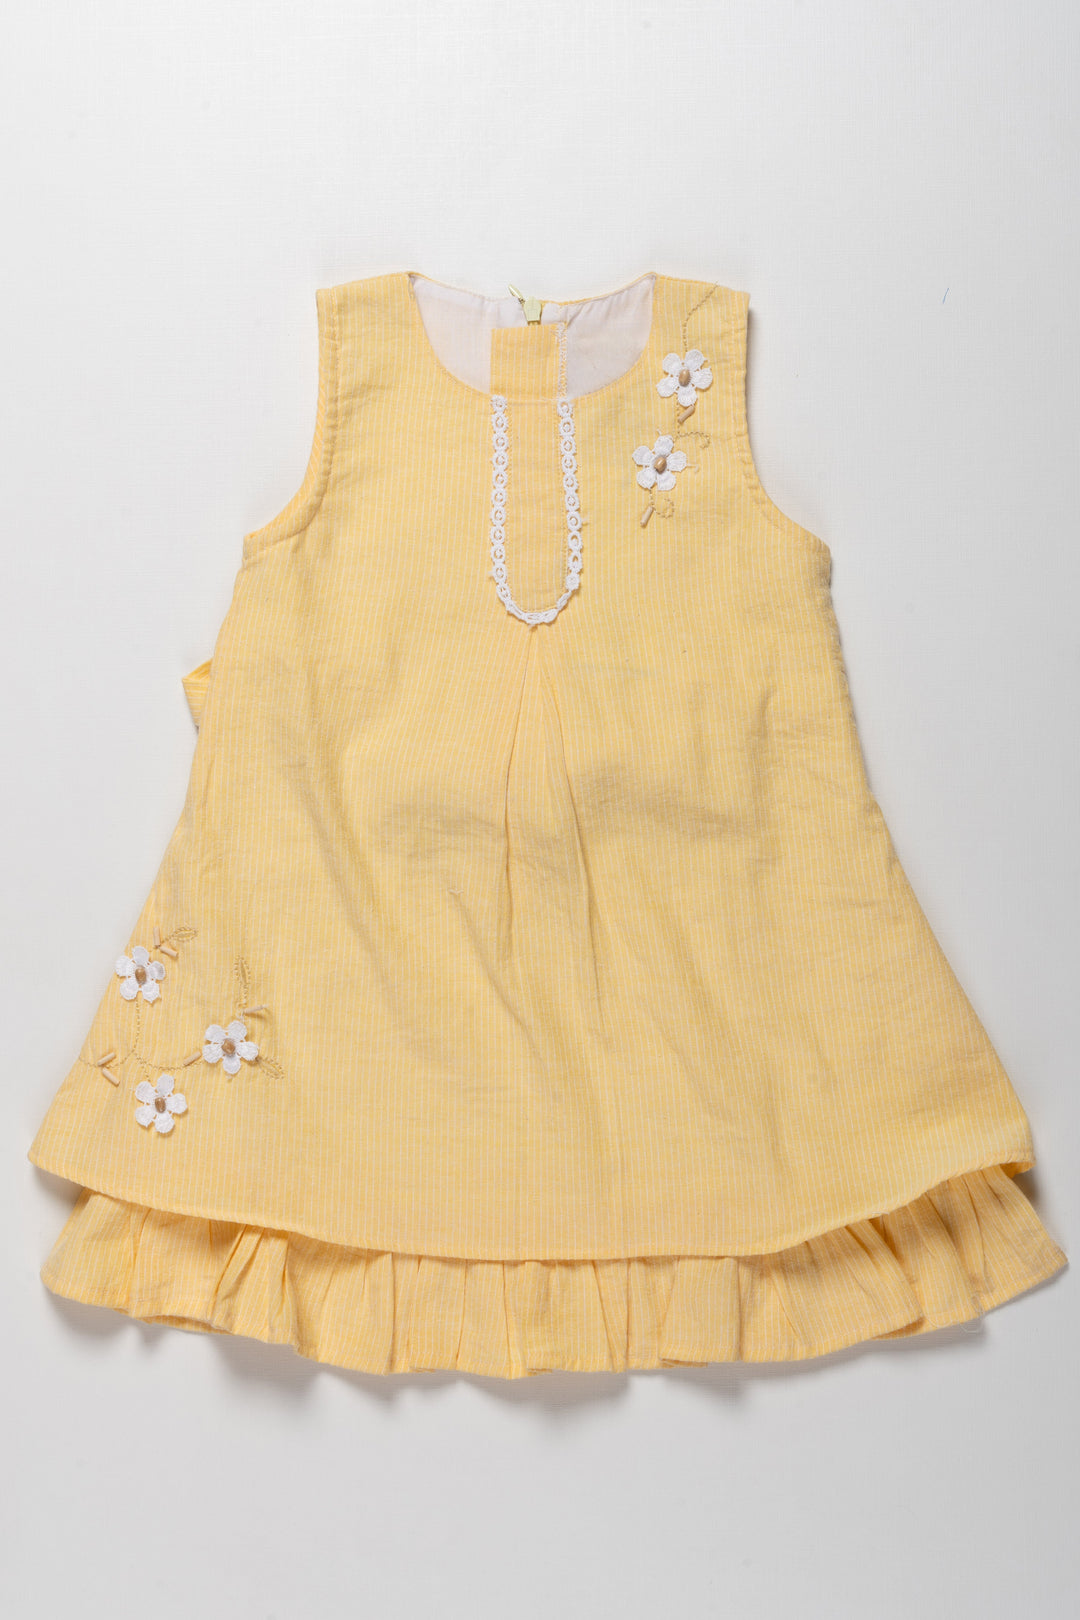 The Nesavu Baby Cotton Frocks Light Lemon Yellow Latest Lace Embroidered Cotton Gown For New Born Infants Nesavu 14 (6M) / Yellow BFJ299-14 Kids Summer Comfy Wear Collection Online | Baby Girls Gown Ideas | The Nesavu